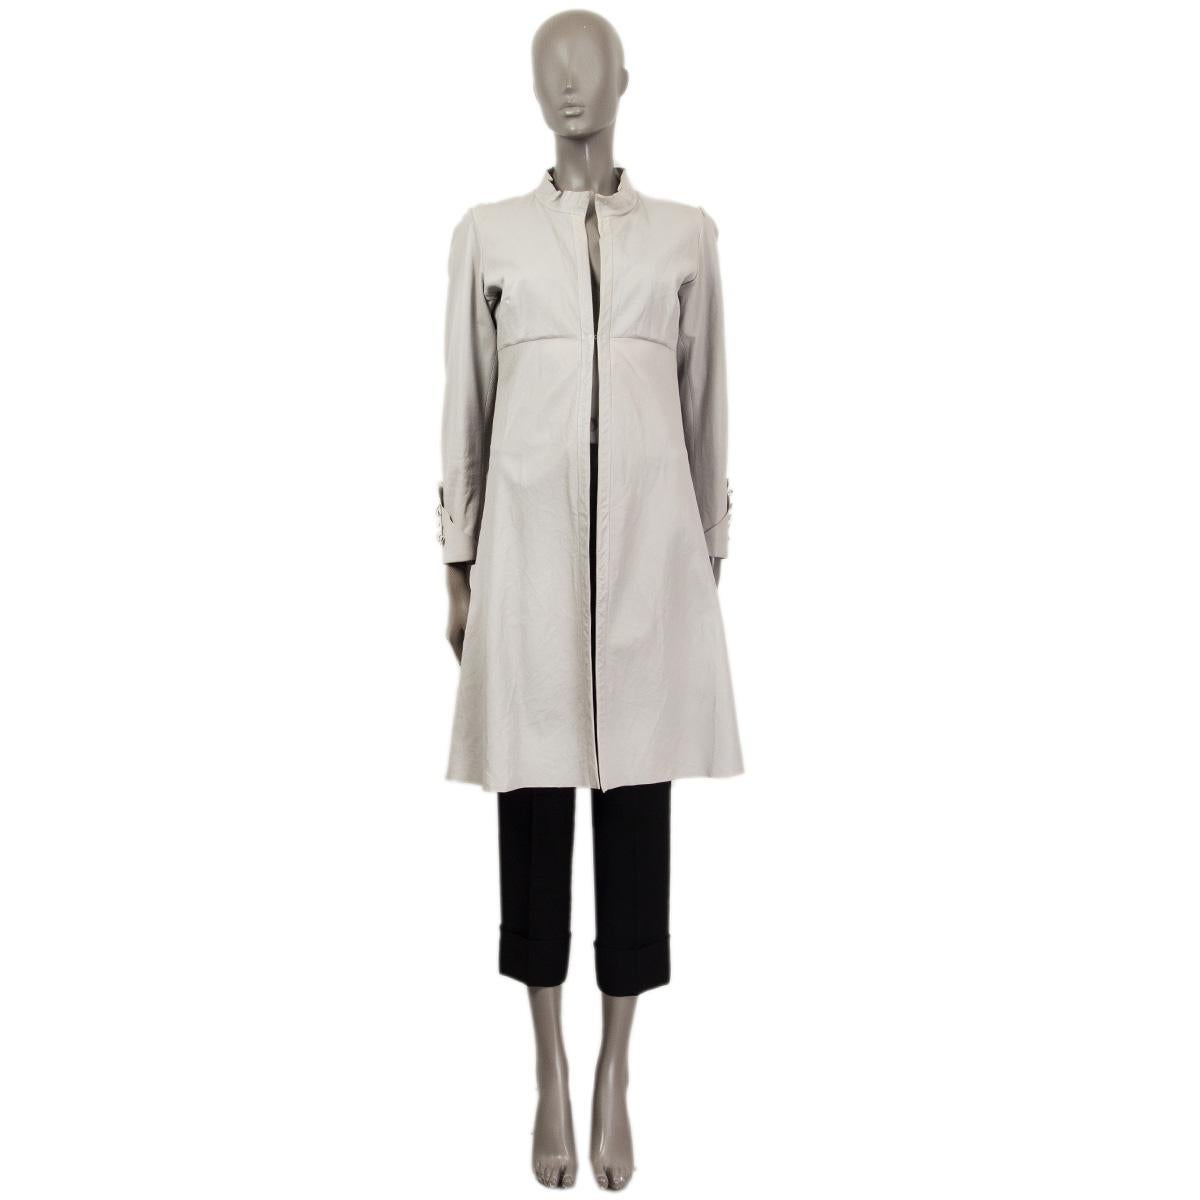 100% authentic Jil Sander leather coat in mat gray leather (100%) with detailed turn-up sleeves. Stand-up collar with stitch detail. Closes with one hook and bar in the front. Lined in beige cotton (100%). Has been worn and shows some usage signs is